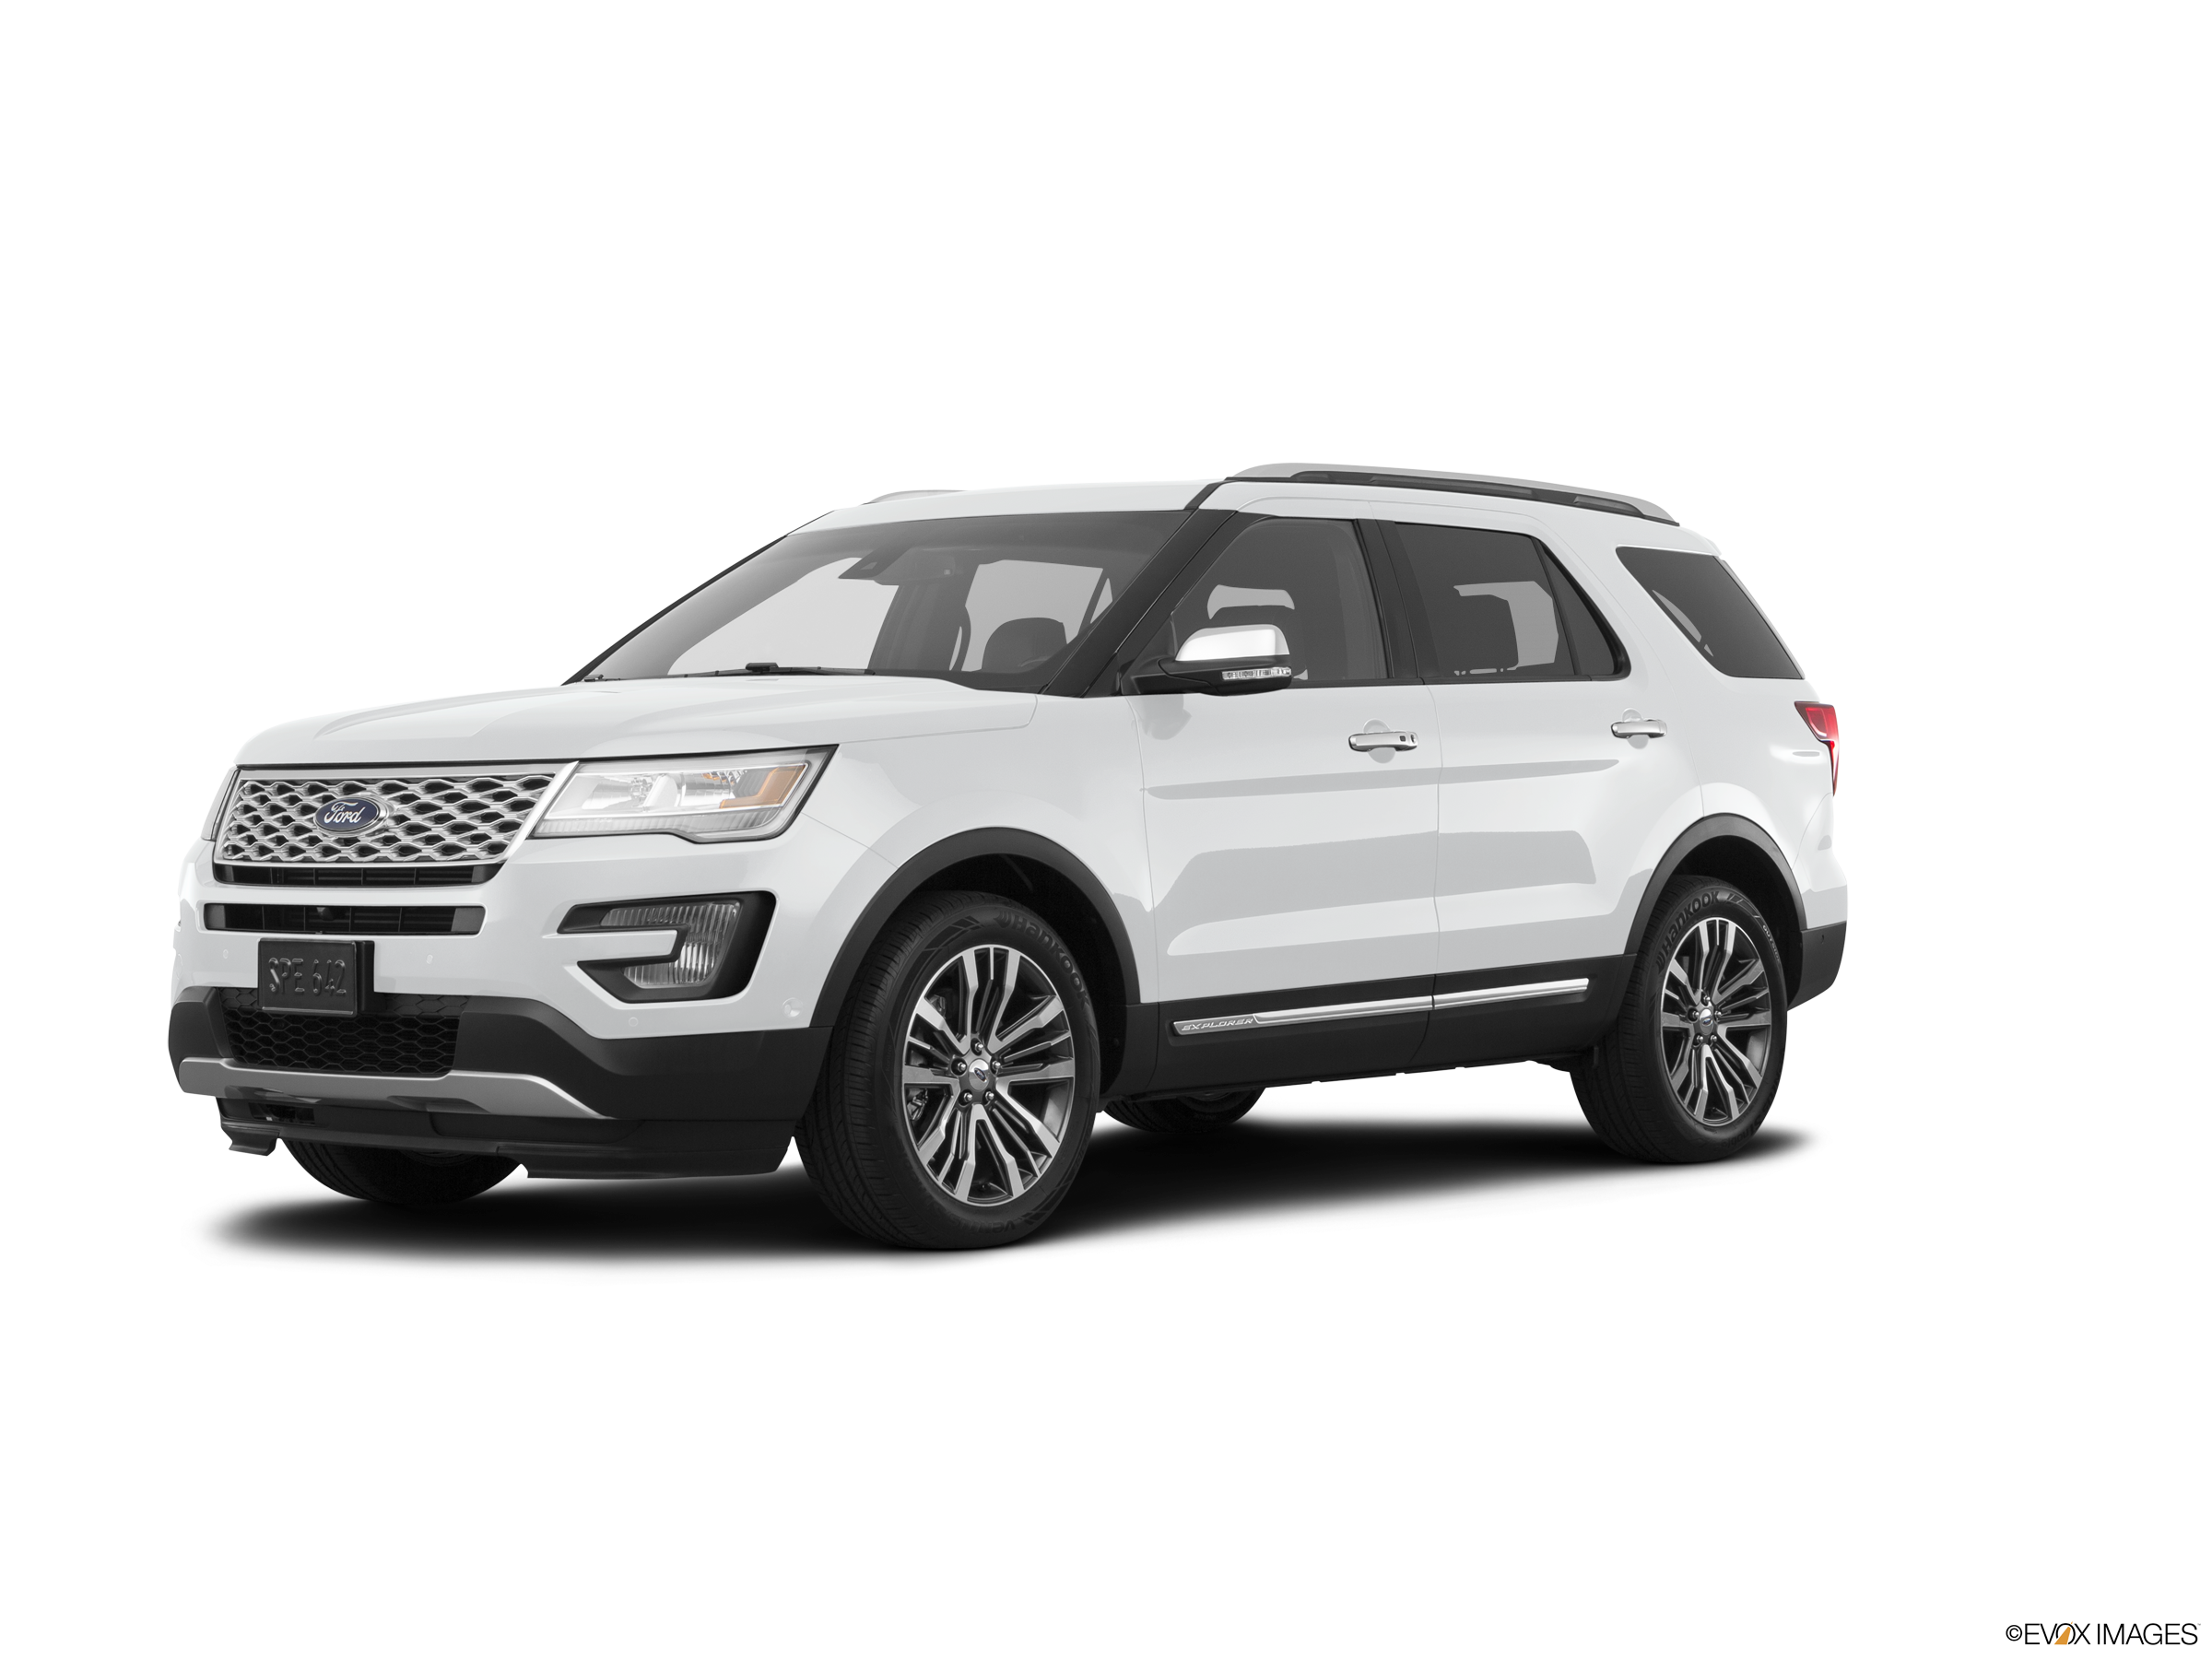 2017 Ford Explorer Platinum is powerful pricey SUV